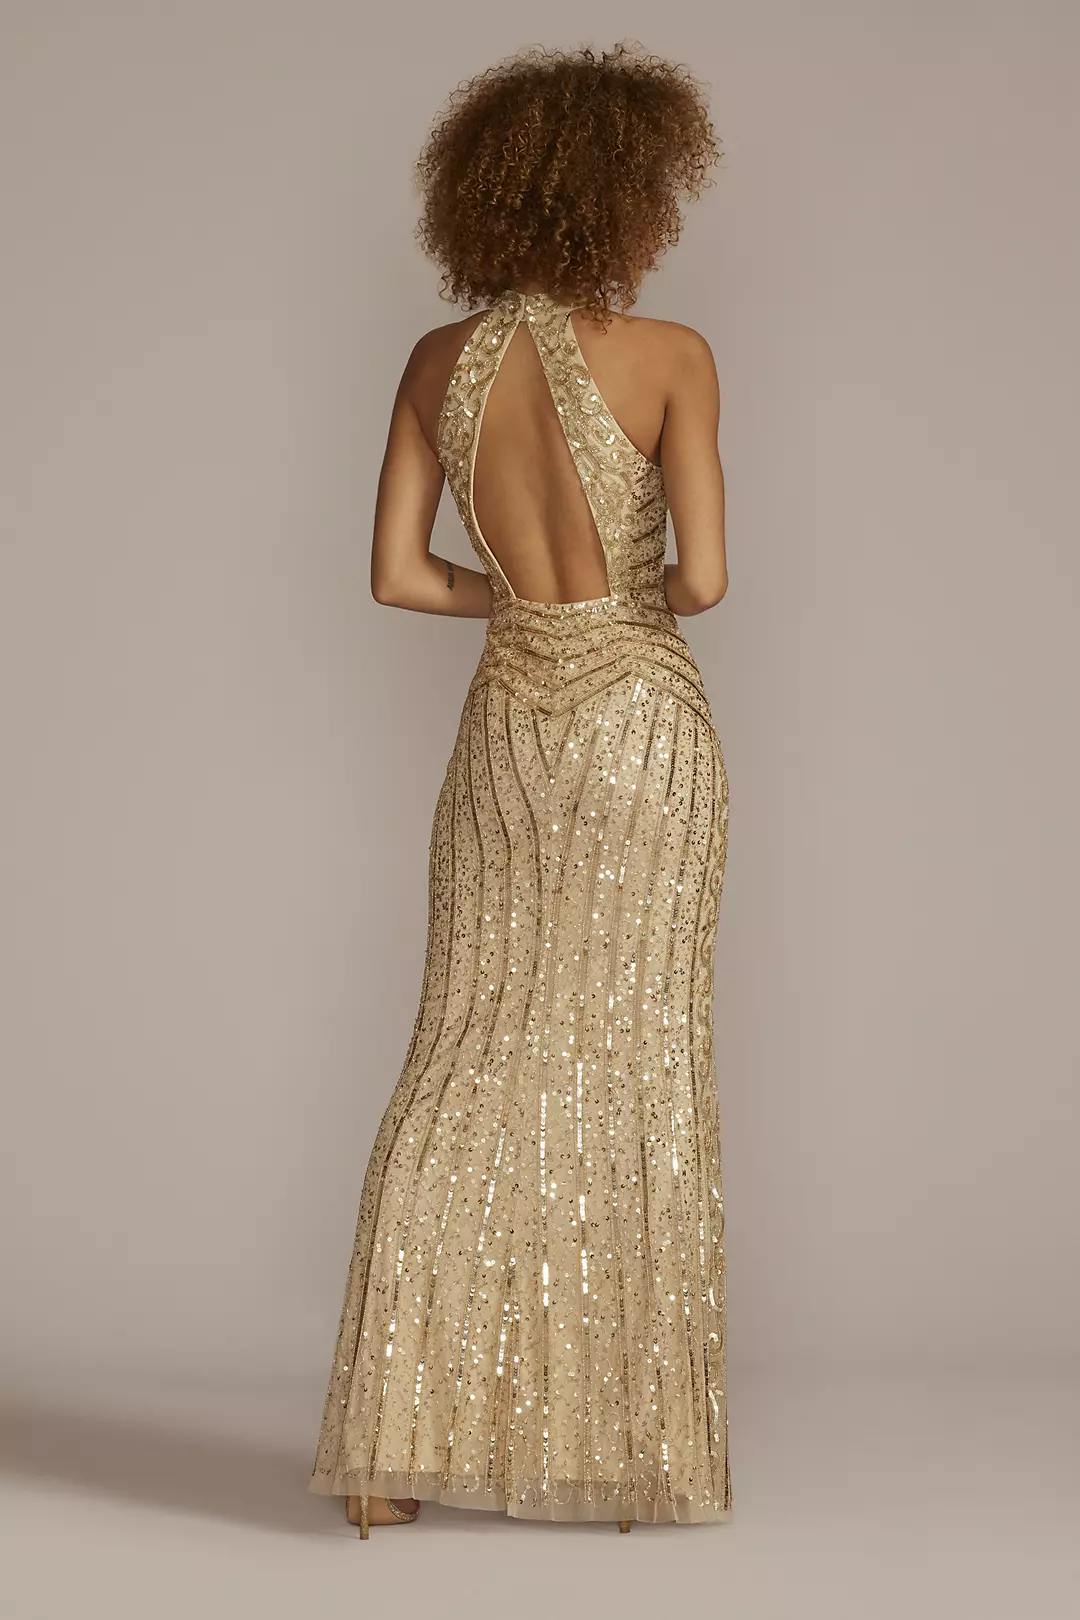 Sequin Halter Neck Gown with Skirt Slit Image 2